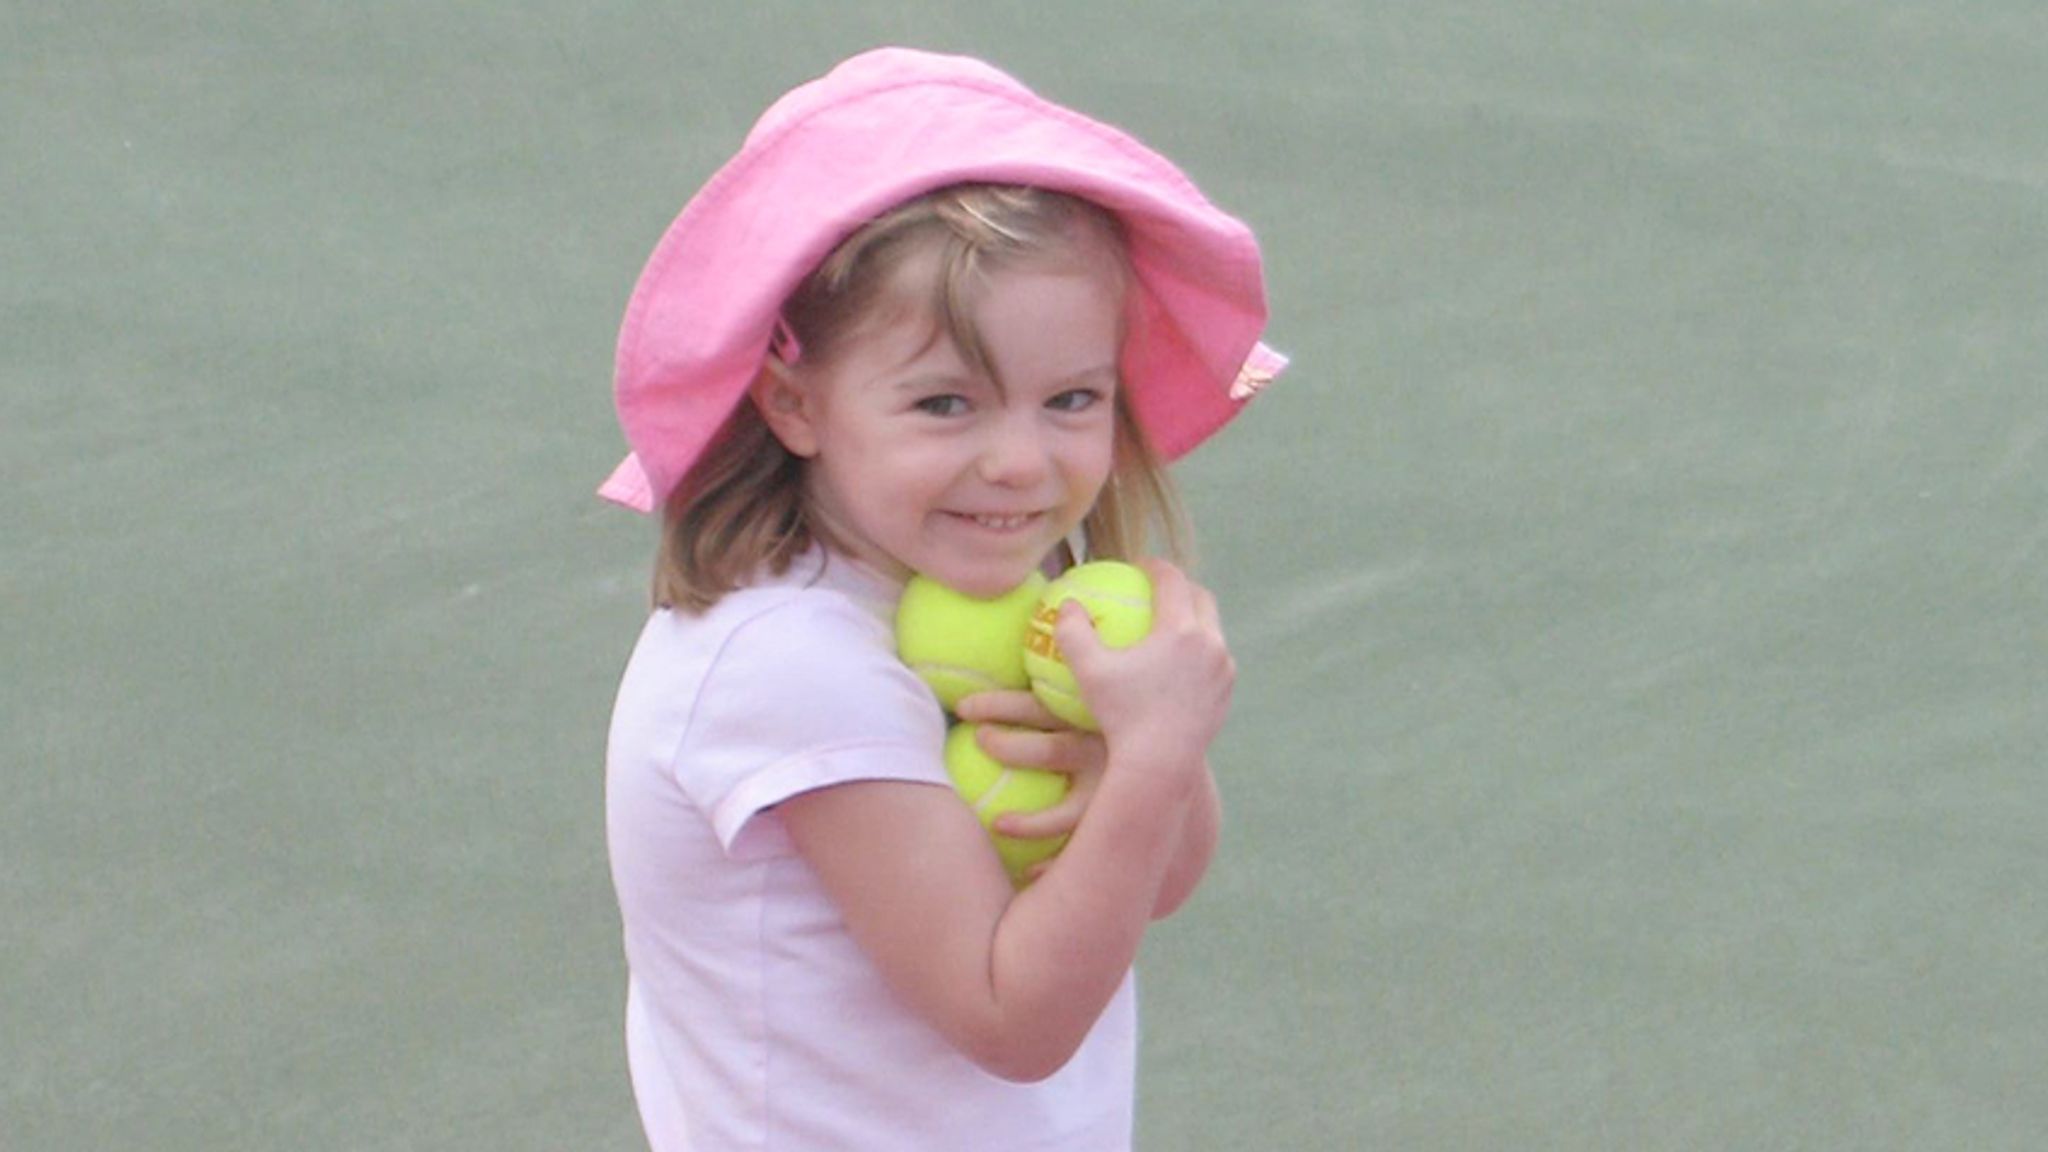 Madeleine Mccann Police Receive 270 Calls And Emails After Appeal For Information About Latest Suspect Uk News Sky News